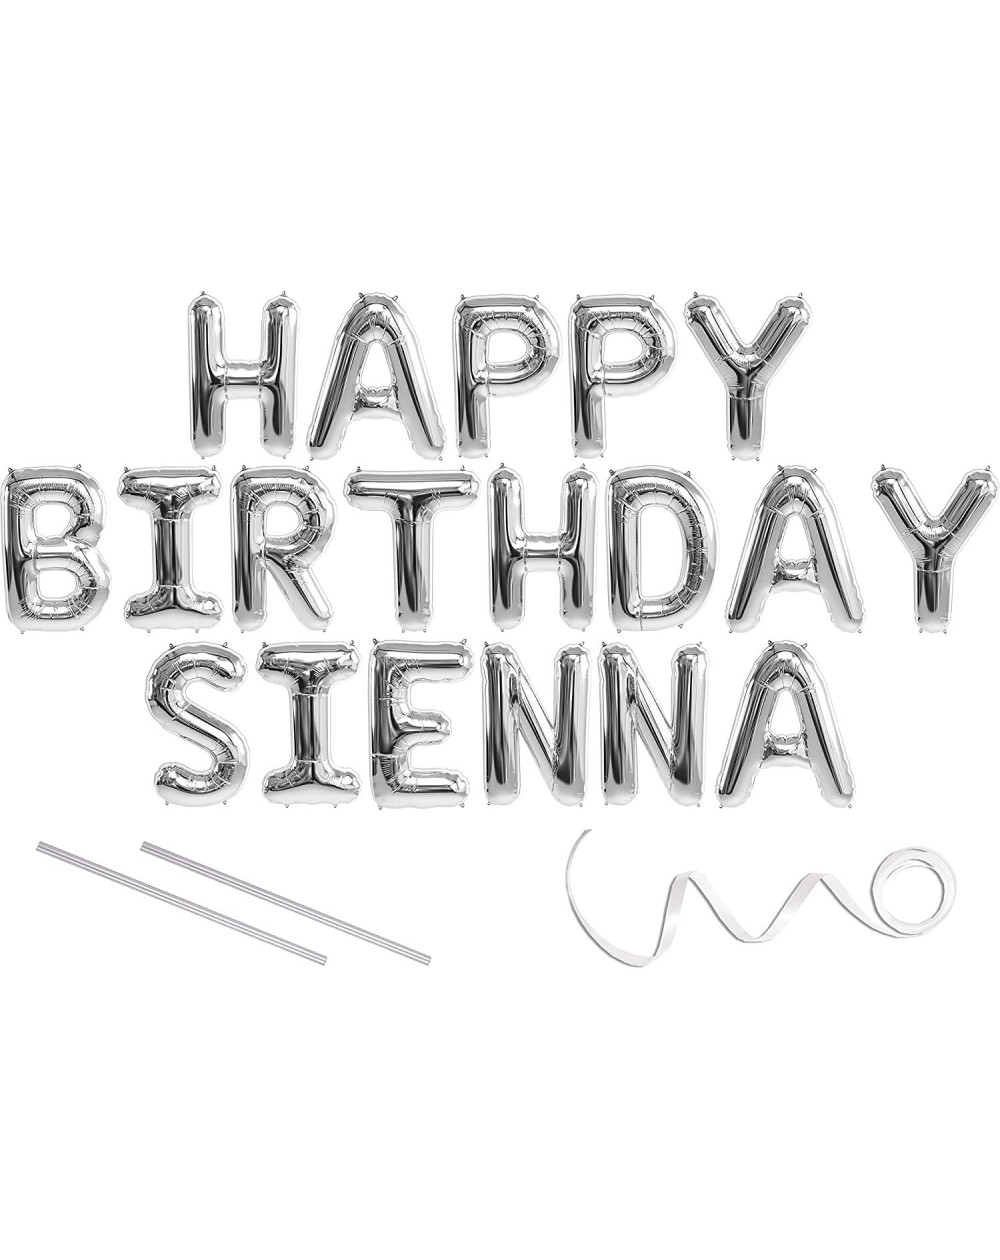 Balloons Sienna- Happy Birthday Mylar Balloon Banner - Silver - 16 inch Letters. Includes 2 Straws for Inflating- String for ...